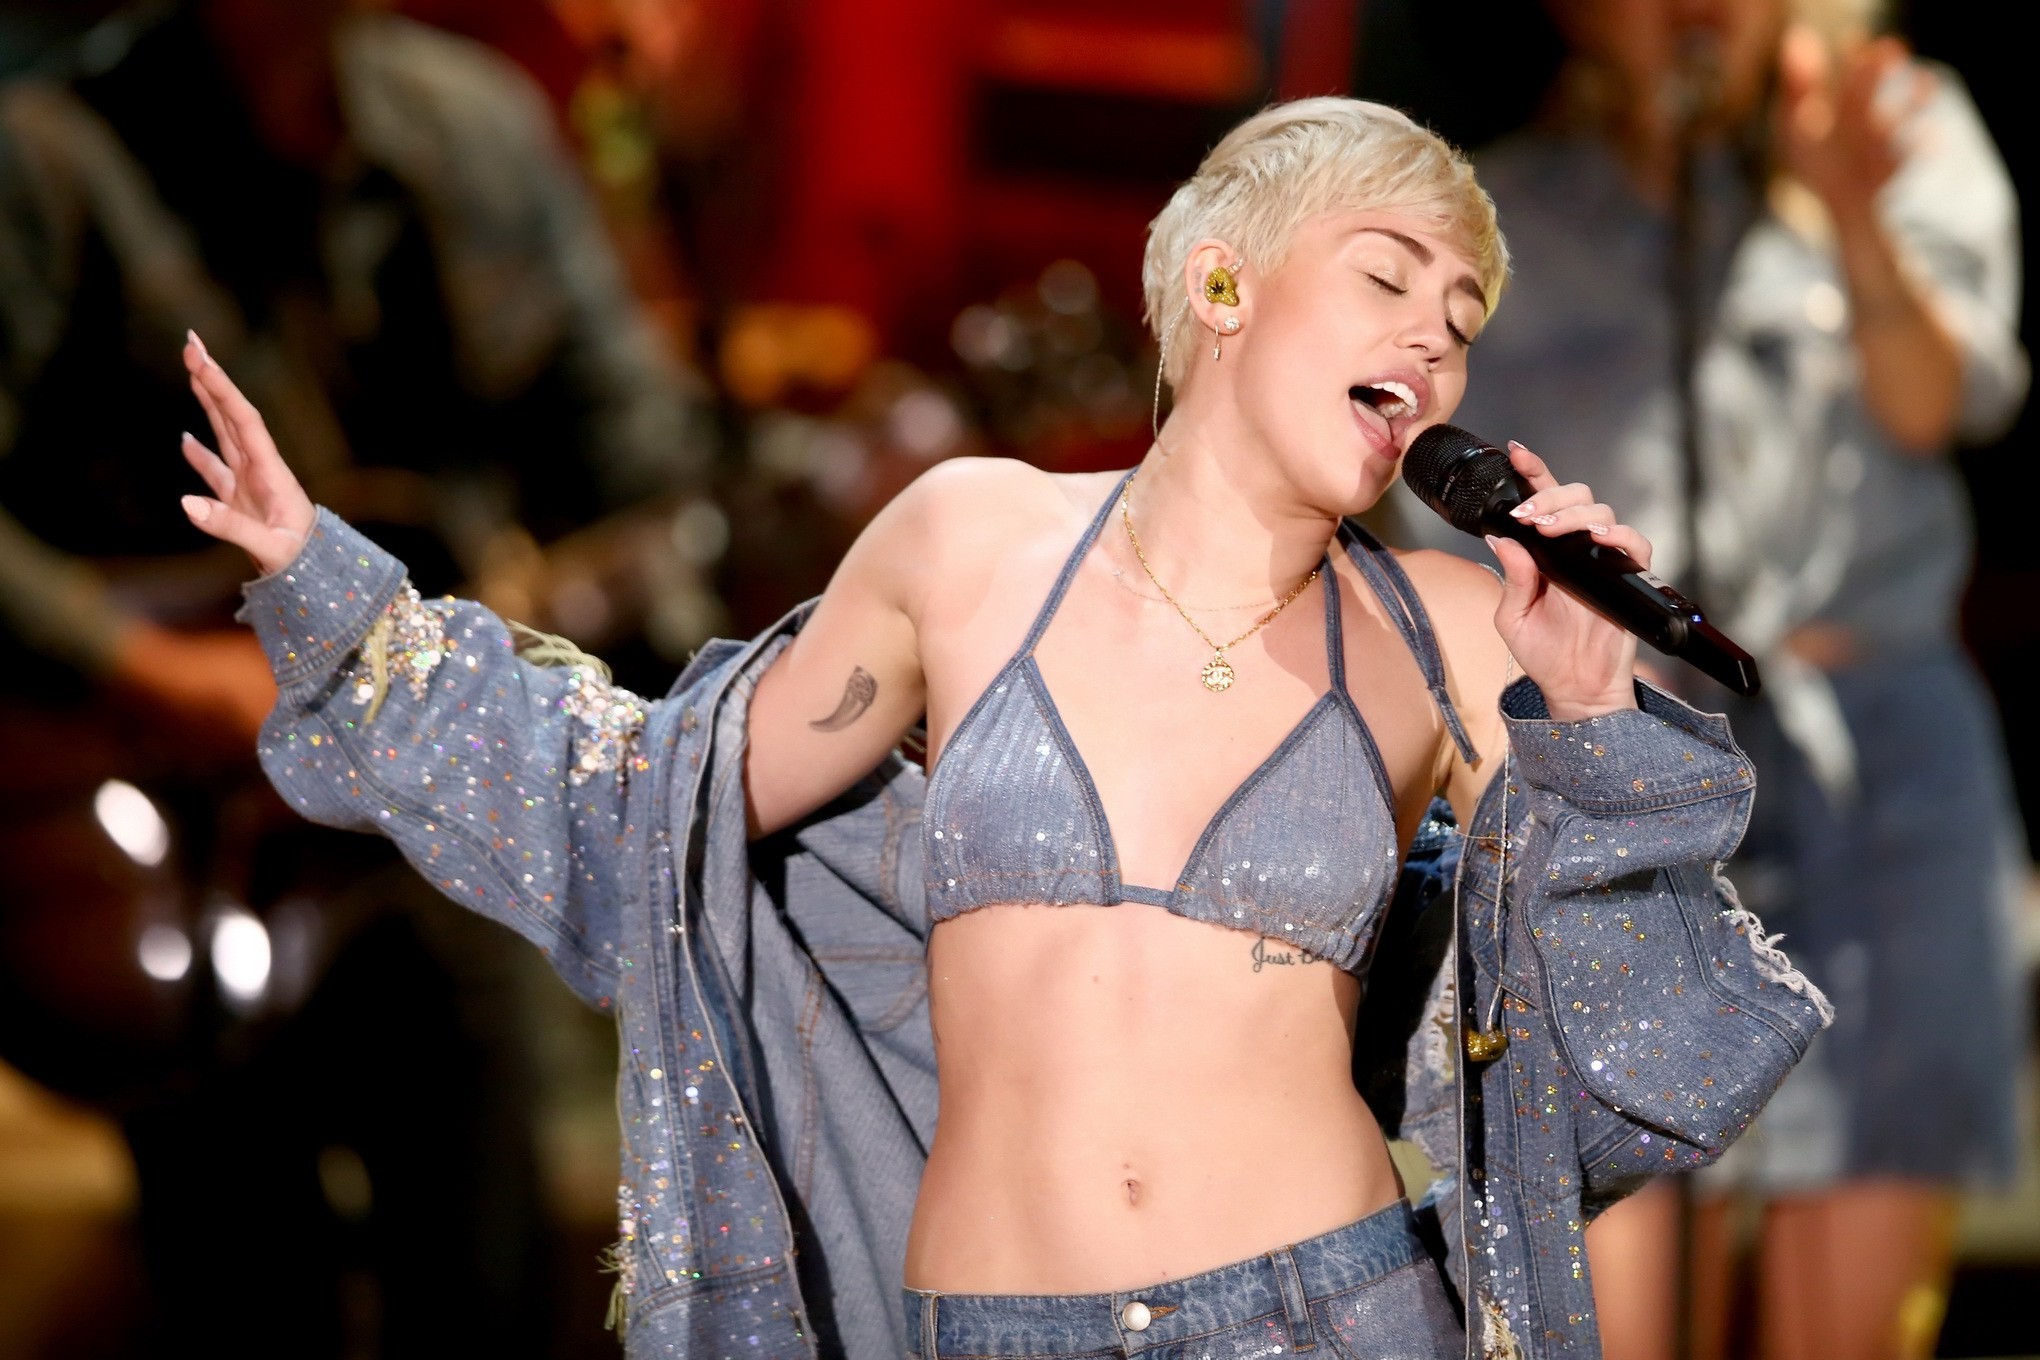 Miley Cyrus perofrming in denim bra  ripped jeans at MTV Unplugged in Hollywood  #75205910